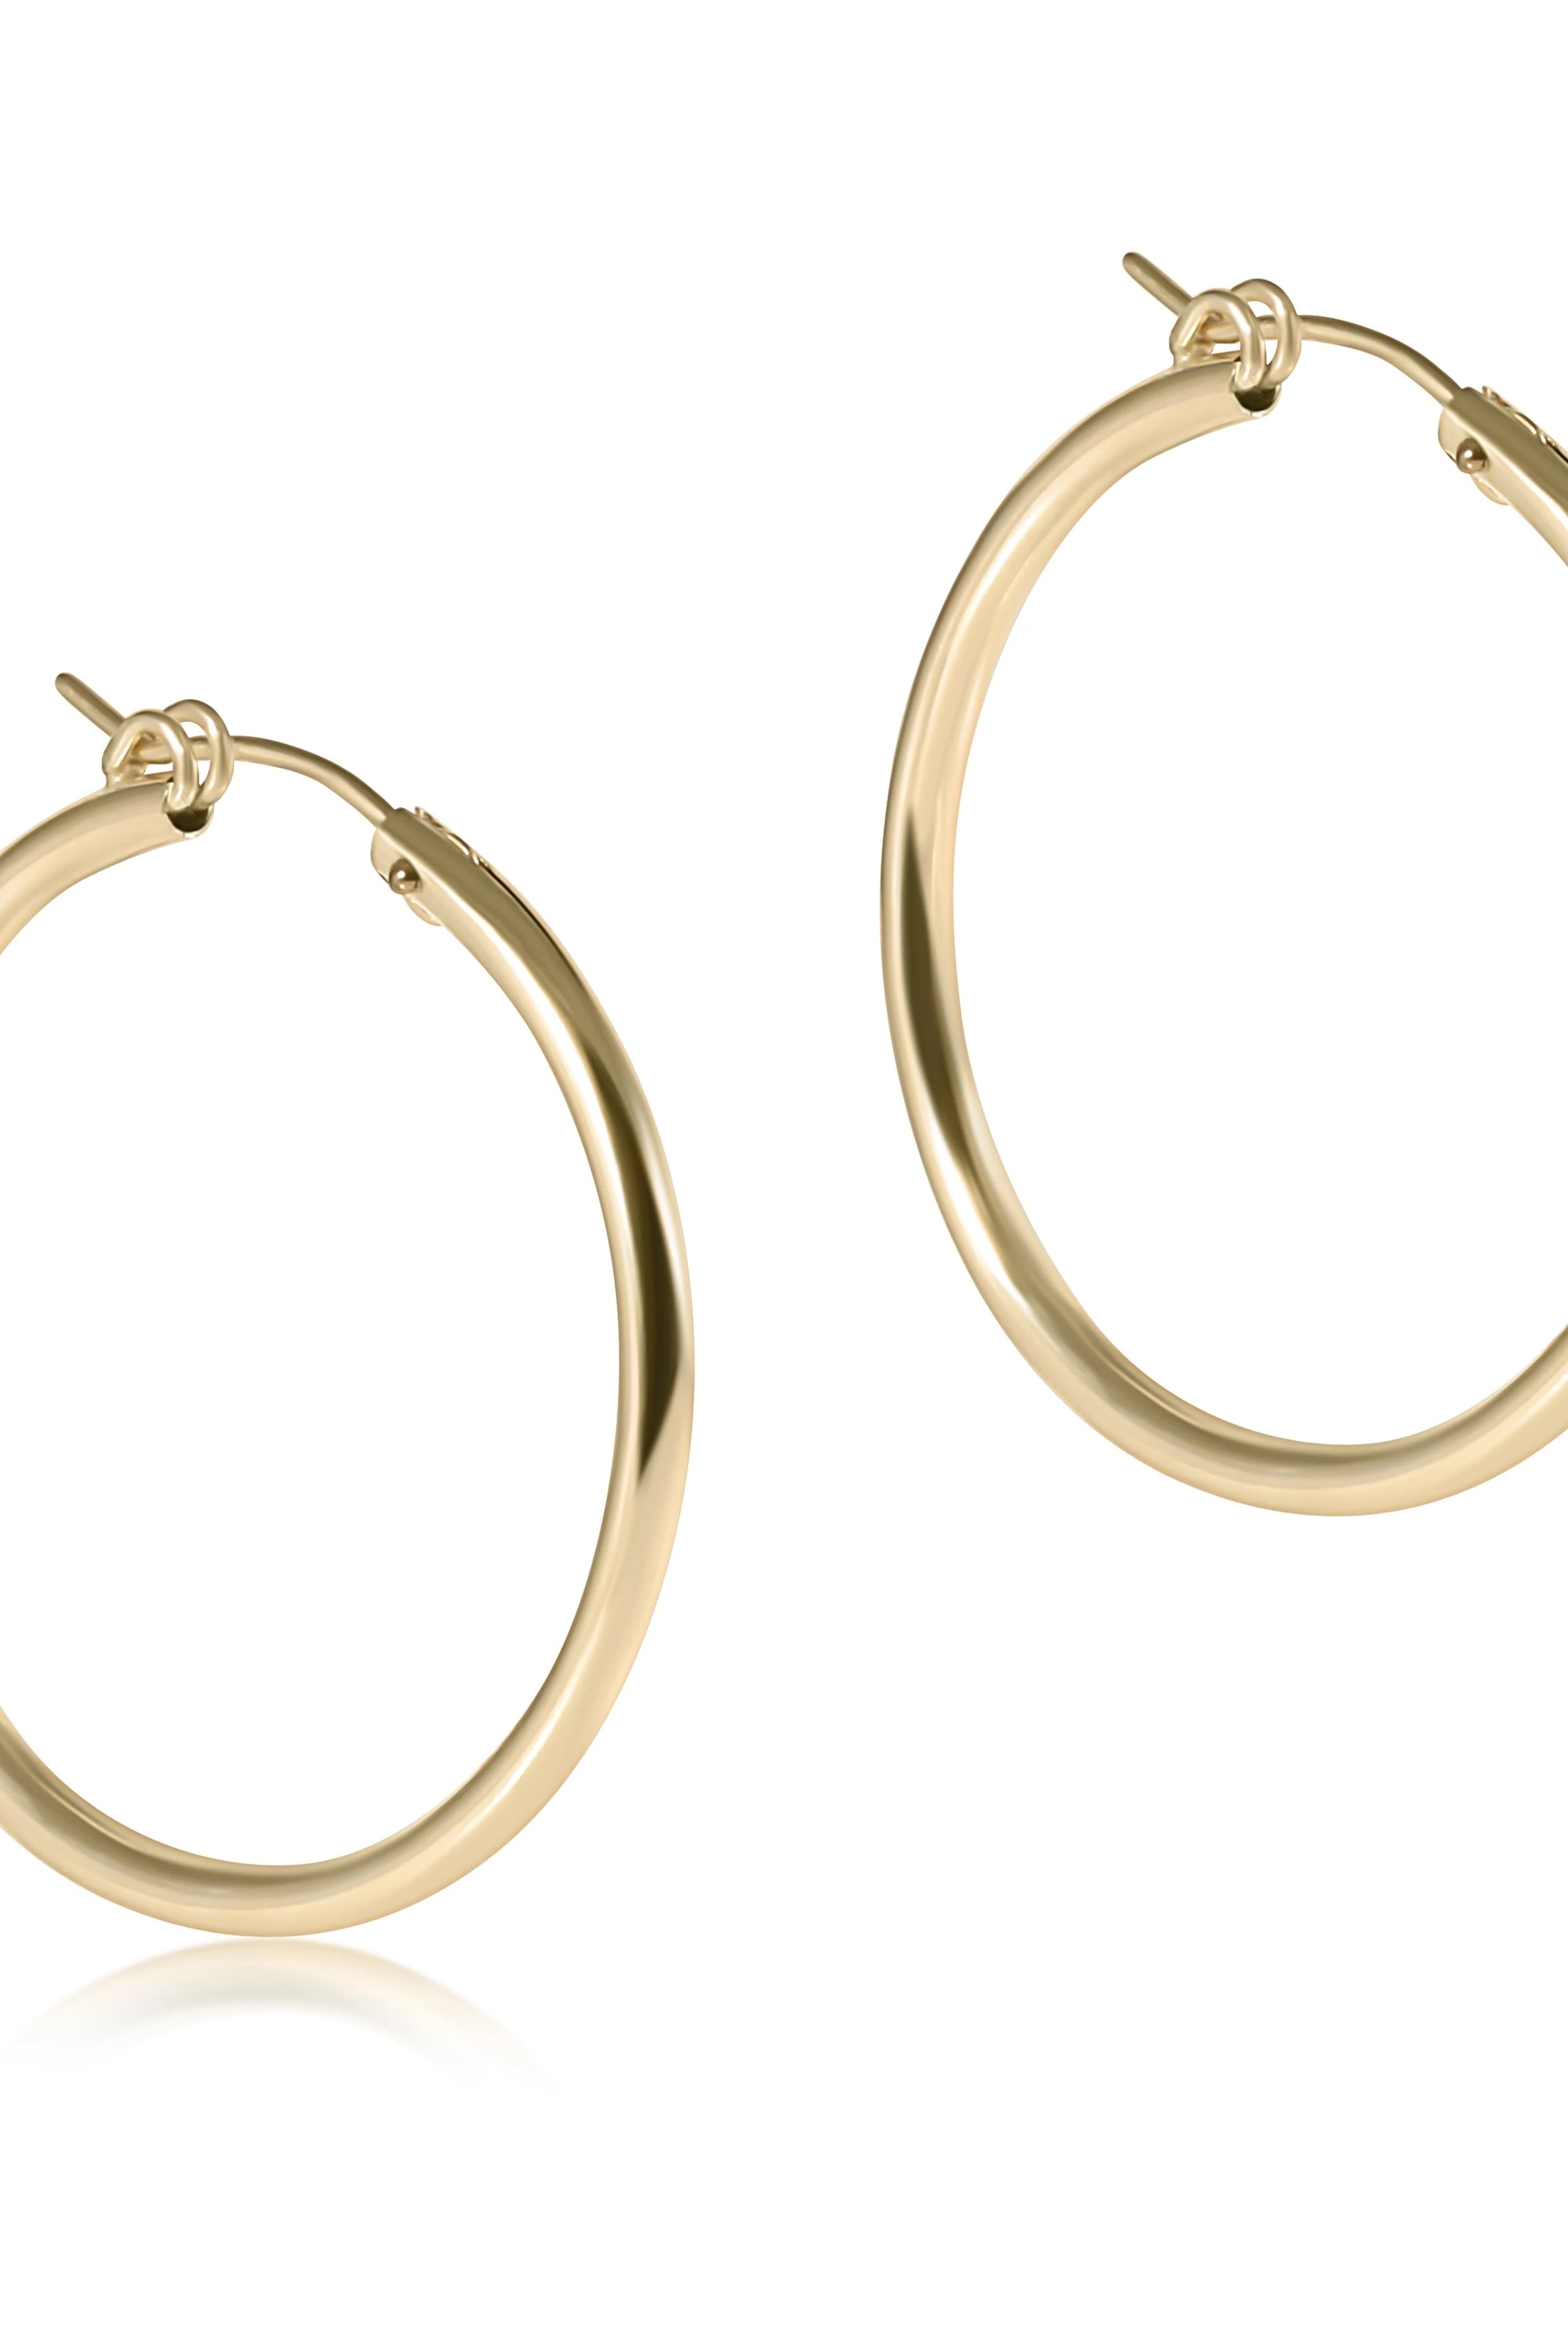 Round Gold 1.25" Hoop Smooth-Earrings-eNewton-The Lovely Closet, Women's Fashion Boutique in Alexandria, KY